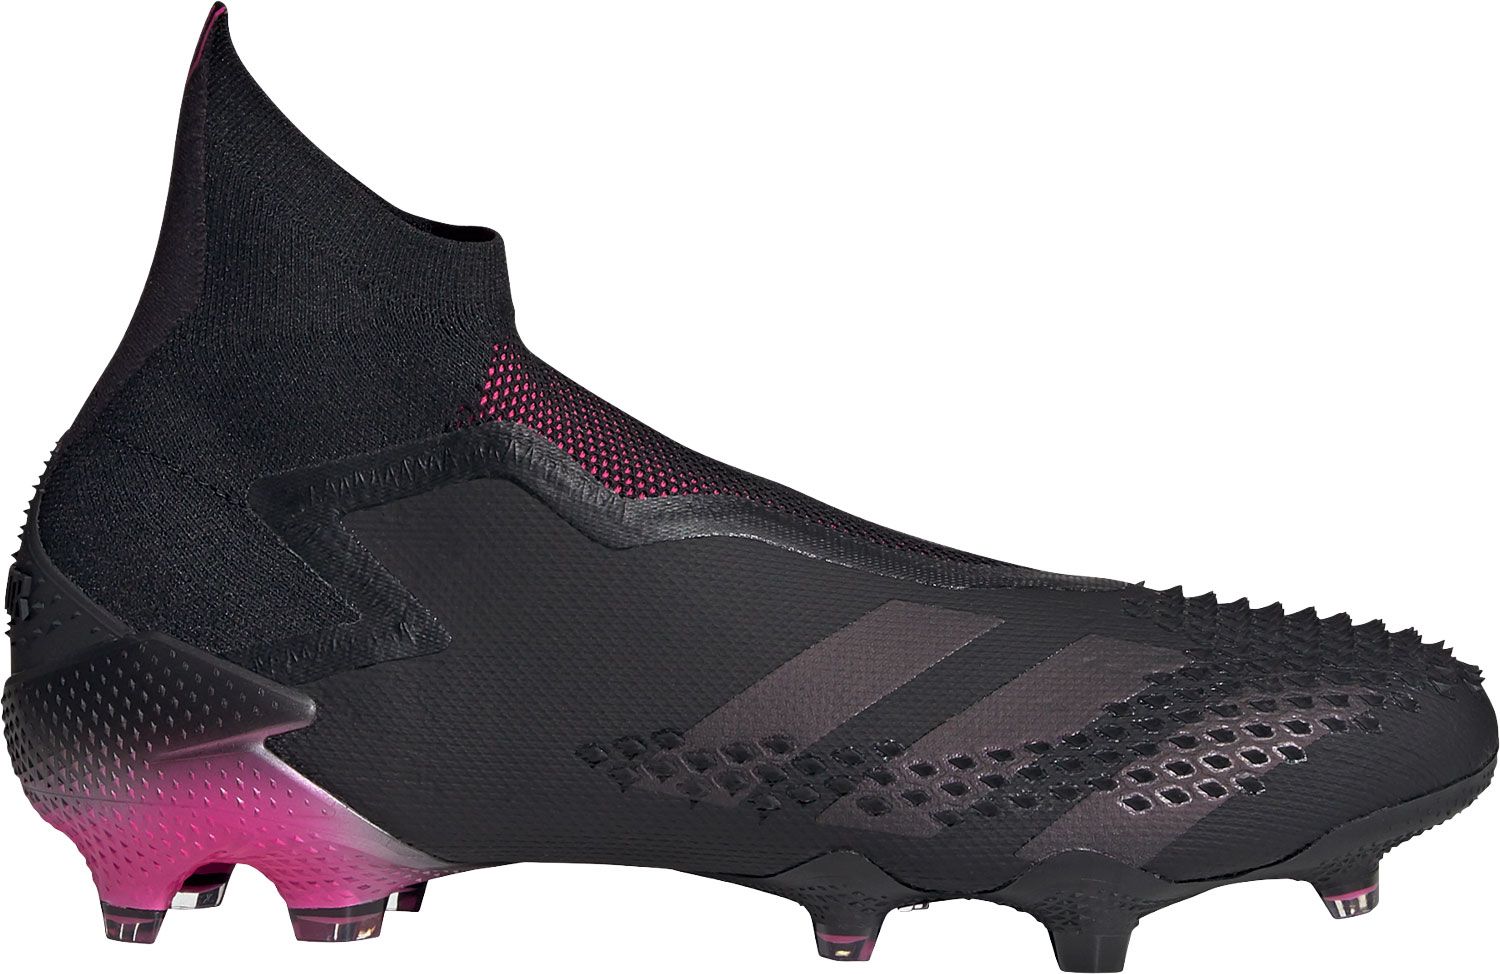 Adidas Predator Tango 19.3 IN 'Archetic Pack' football boots